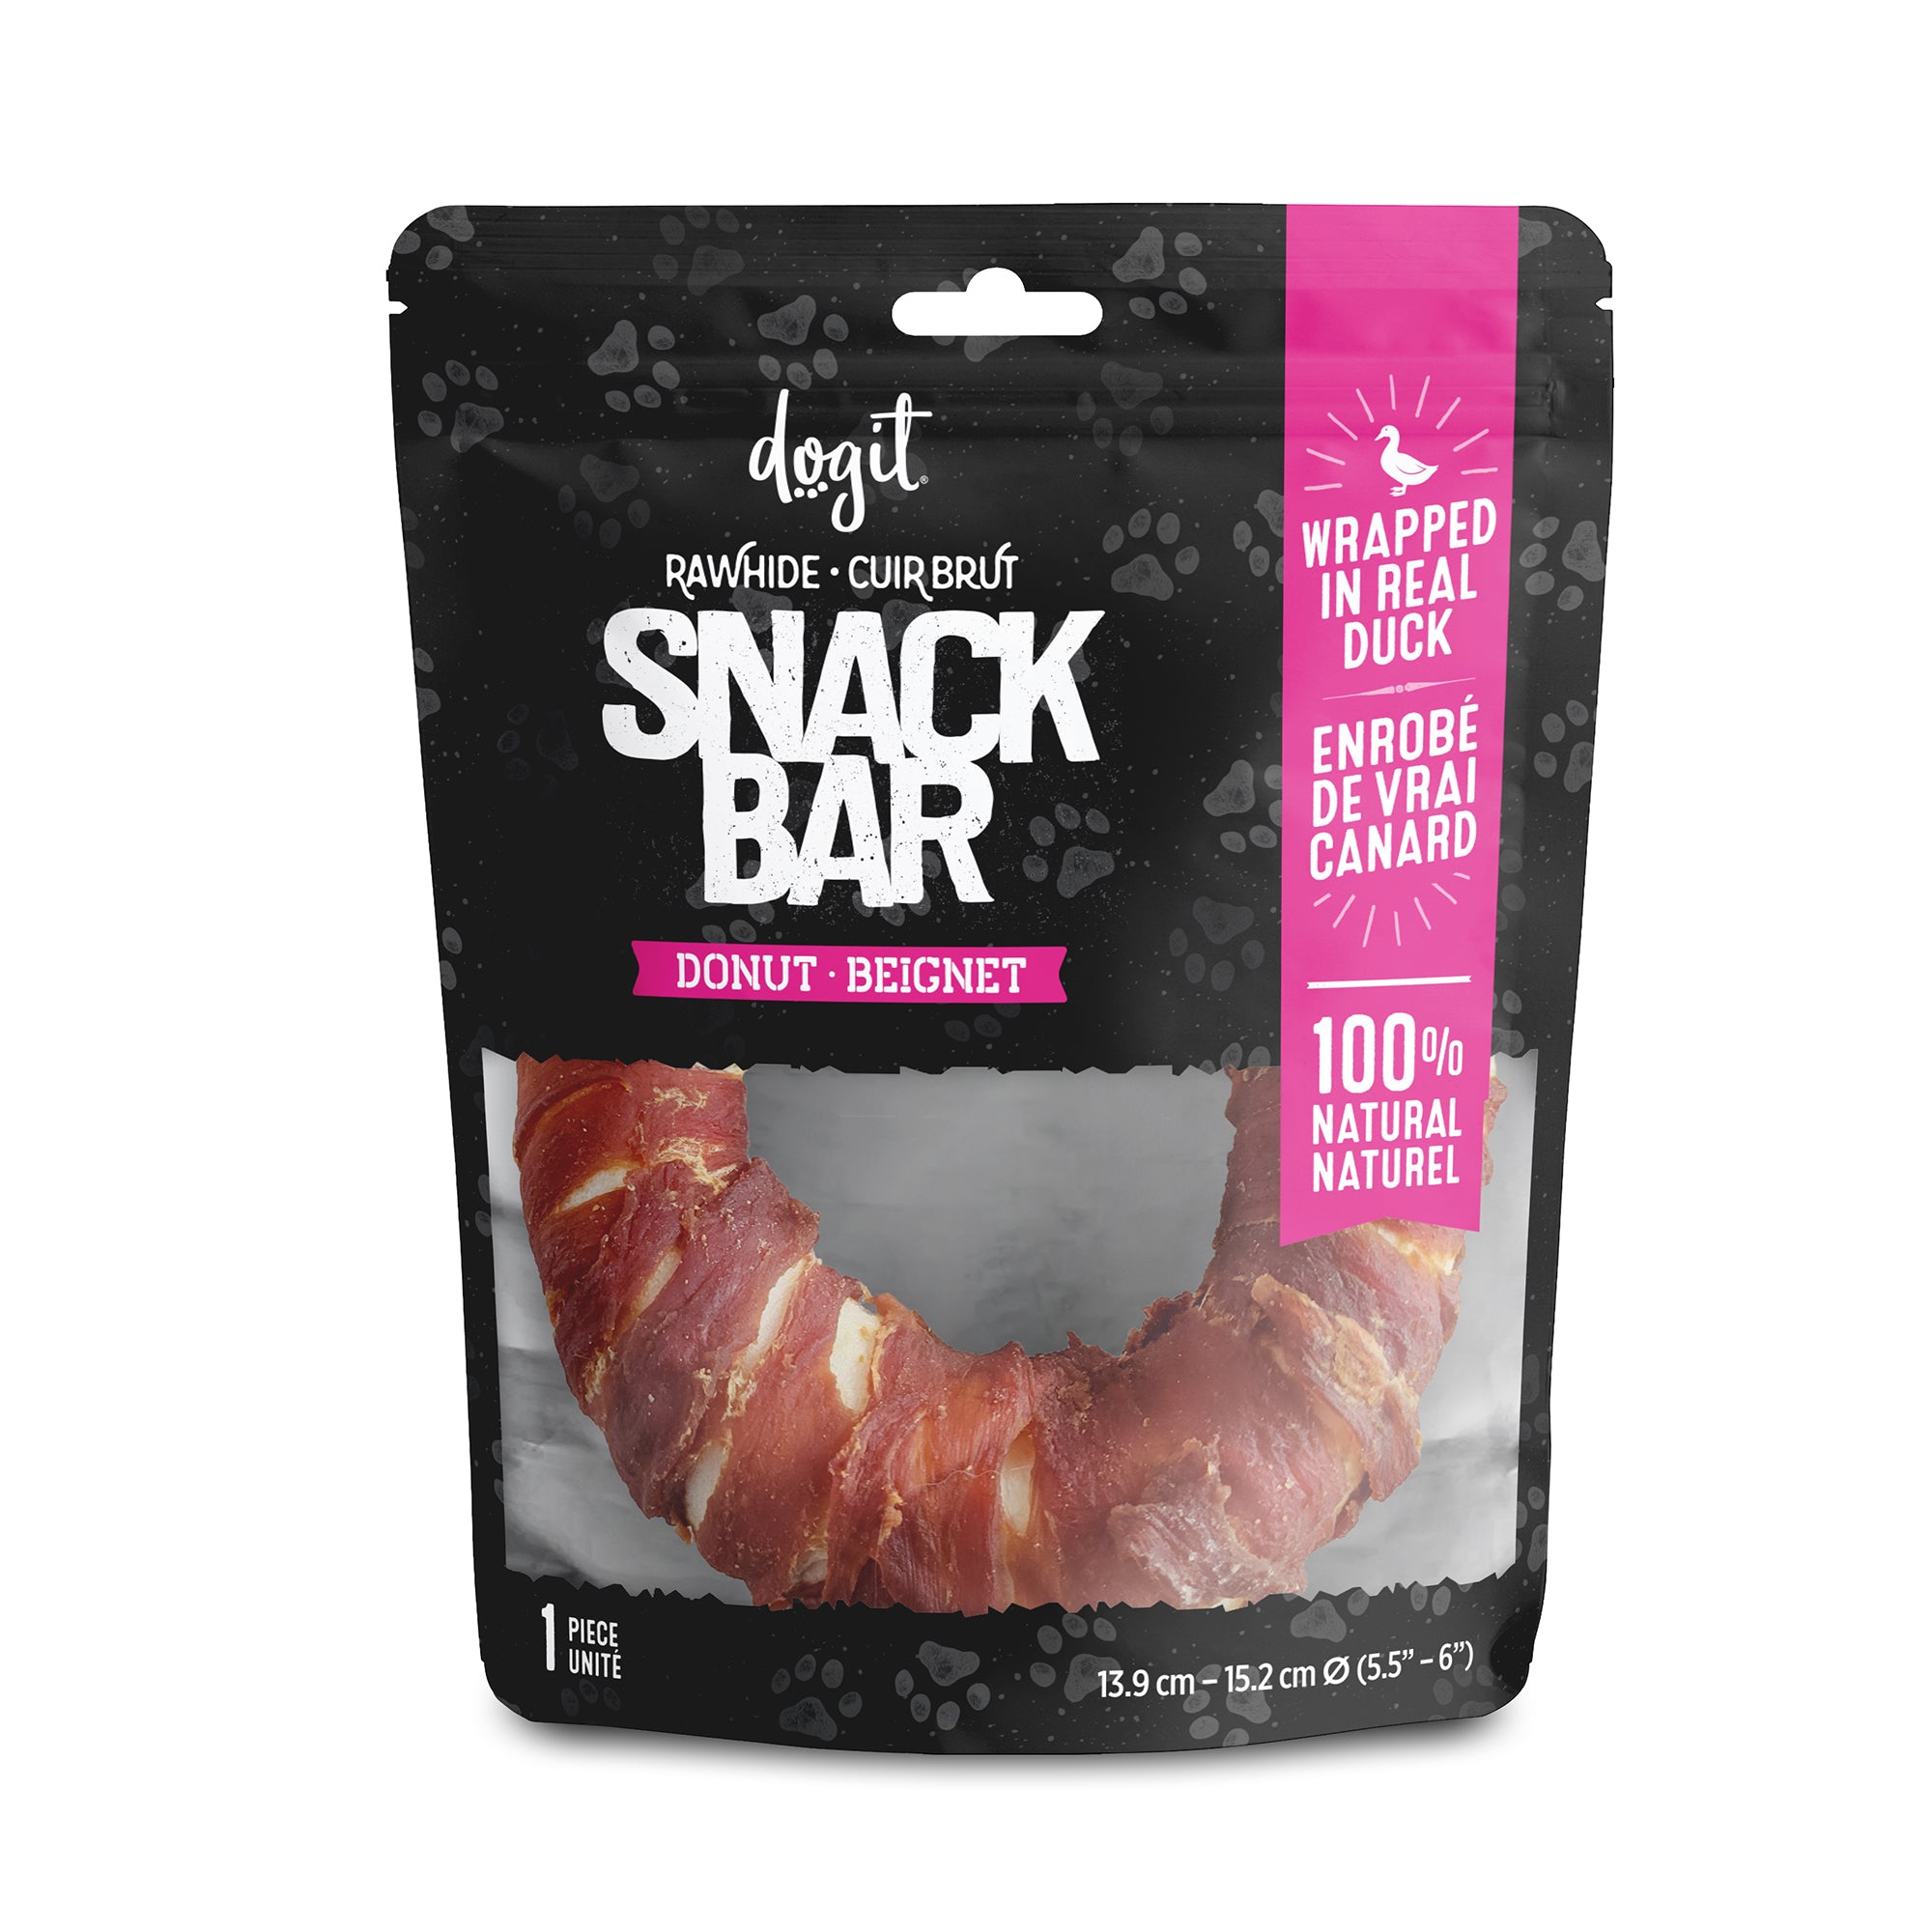 Dogit Snack Bar Rawhide - Duck-Wrapped Donut - 1 pc (13.9 - 15.2 cm/5.5 - 6 in dia.)